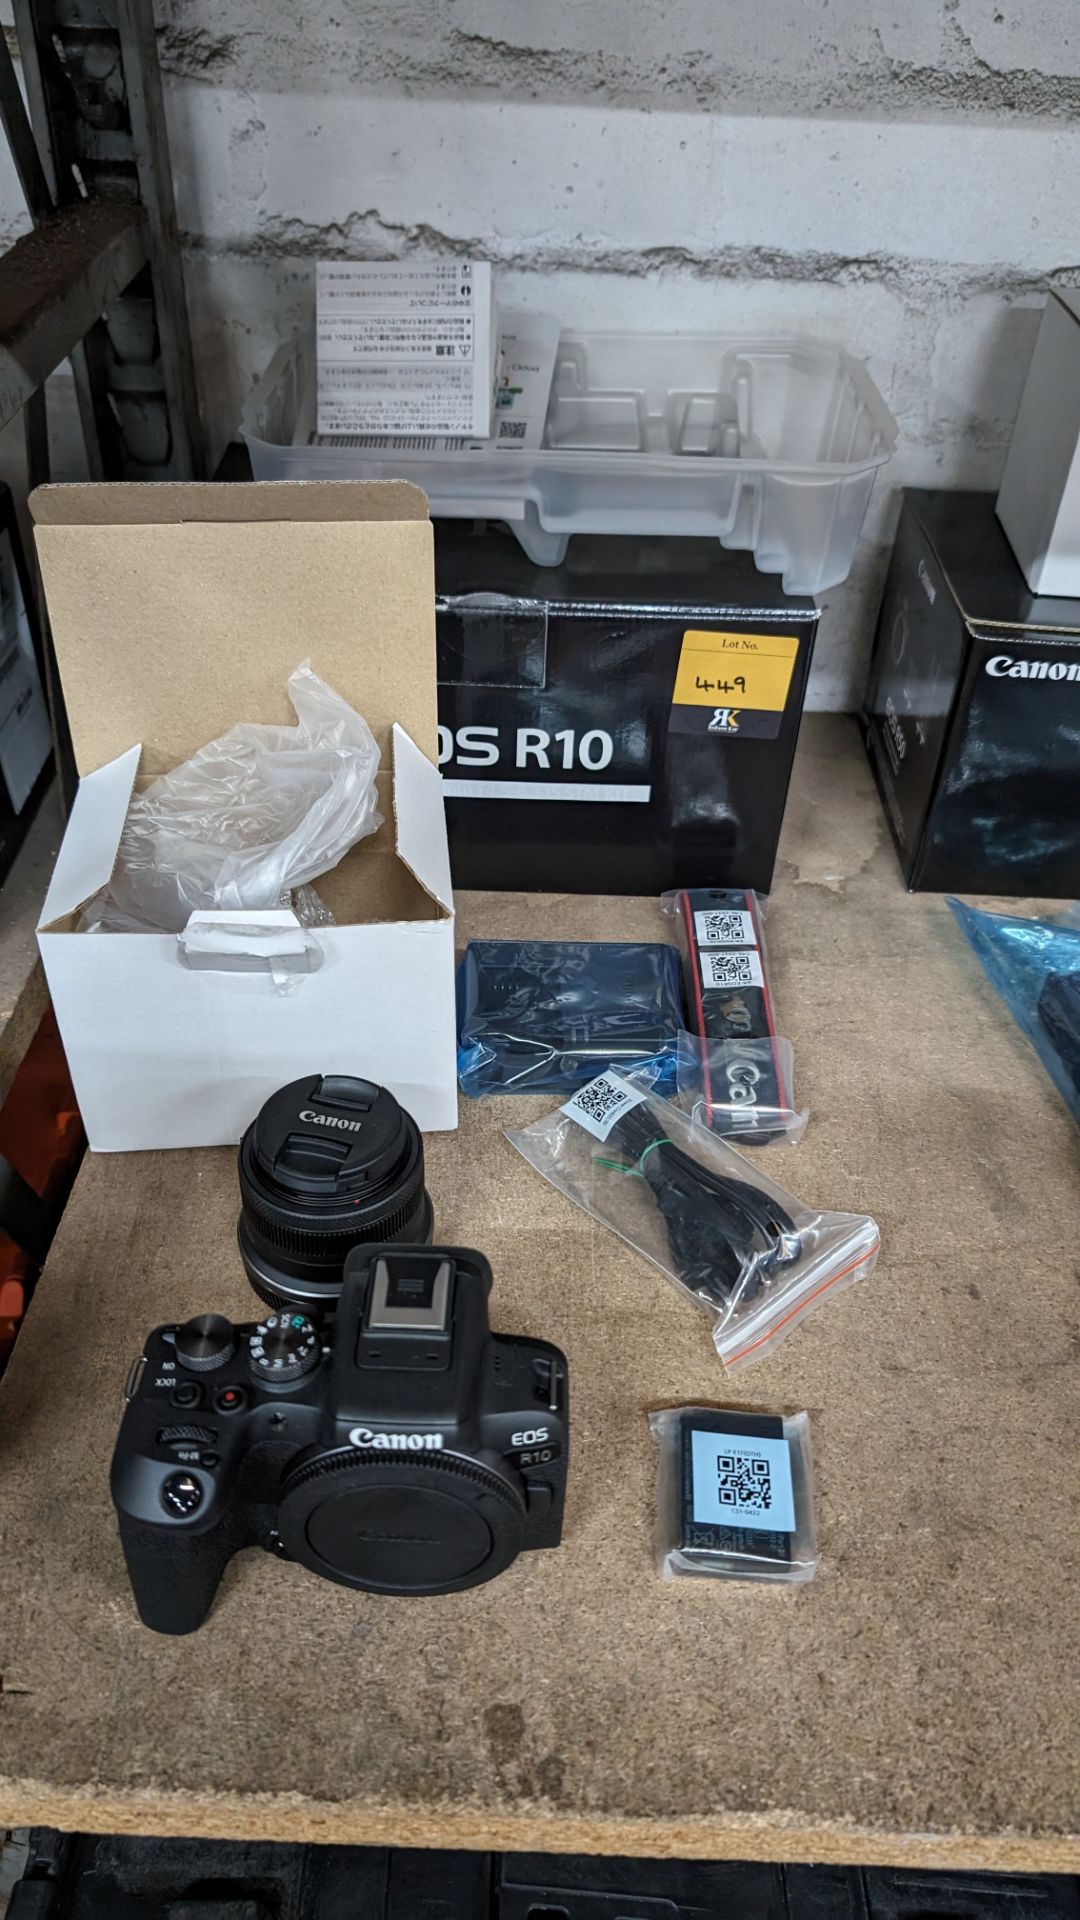 Canon EOS R10 camera kit, including 18-45mm lens, plus strap, battery, charger, cable and more